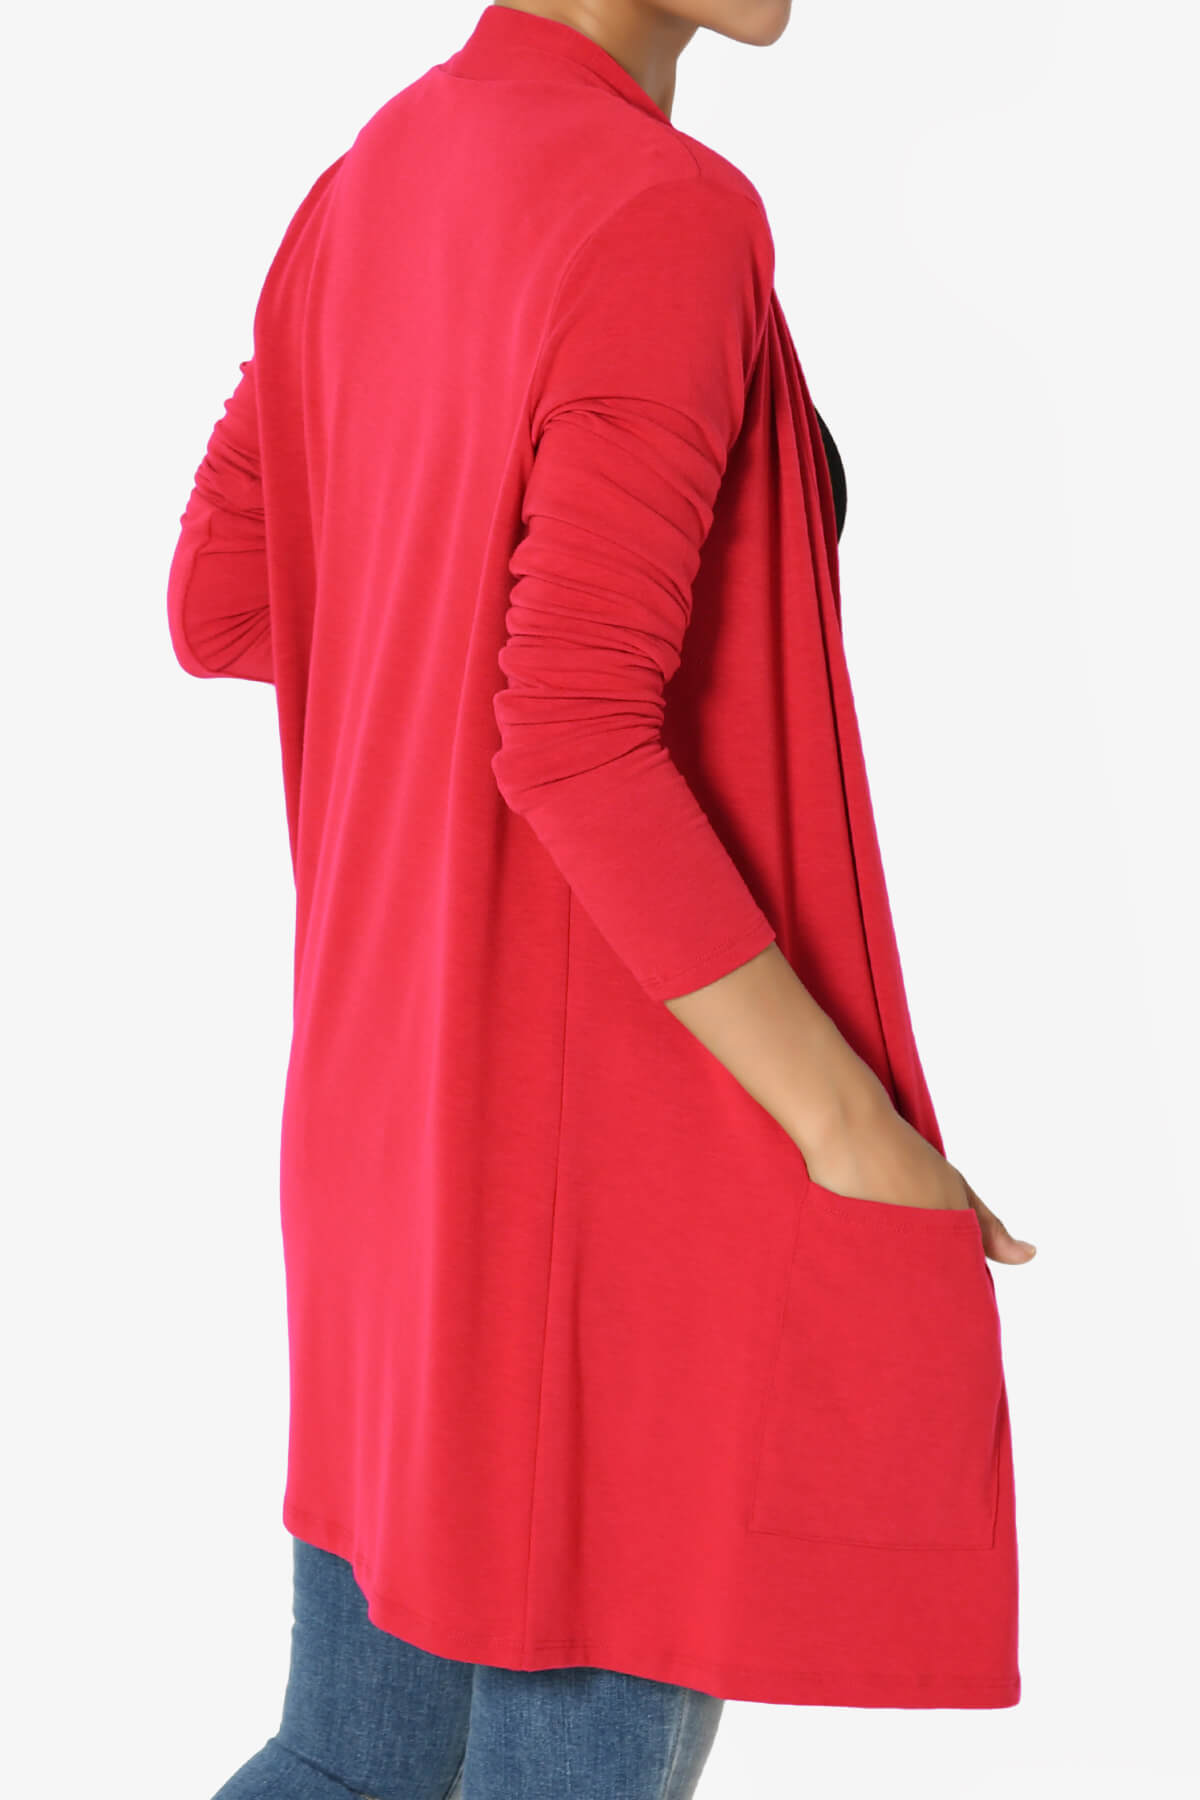 Daday Long Sleeve Pocket Open Front Cardigan RED_4